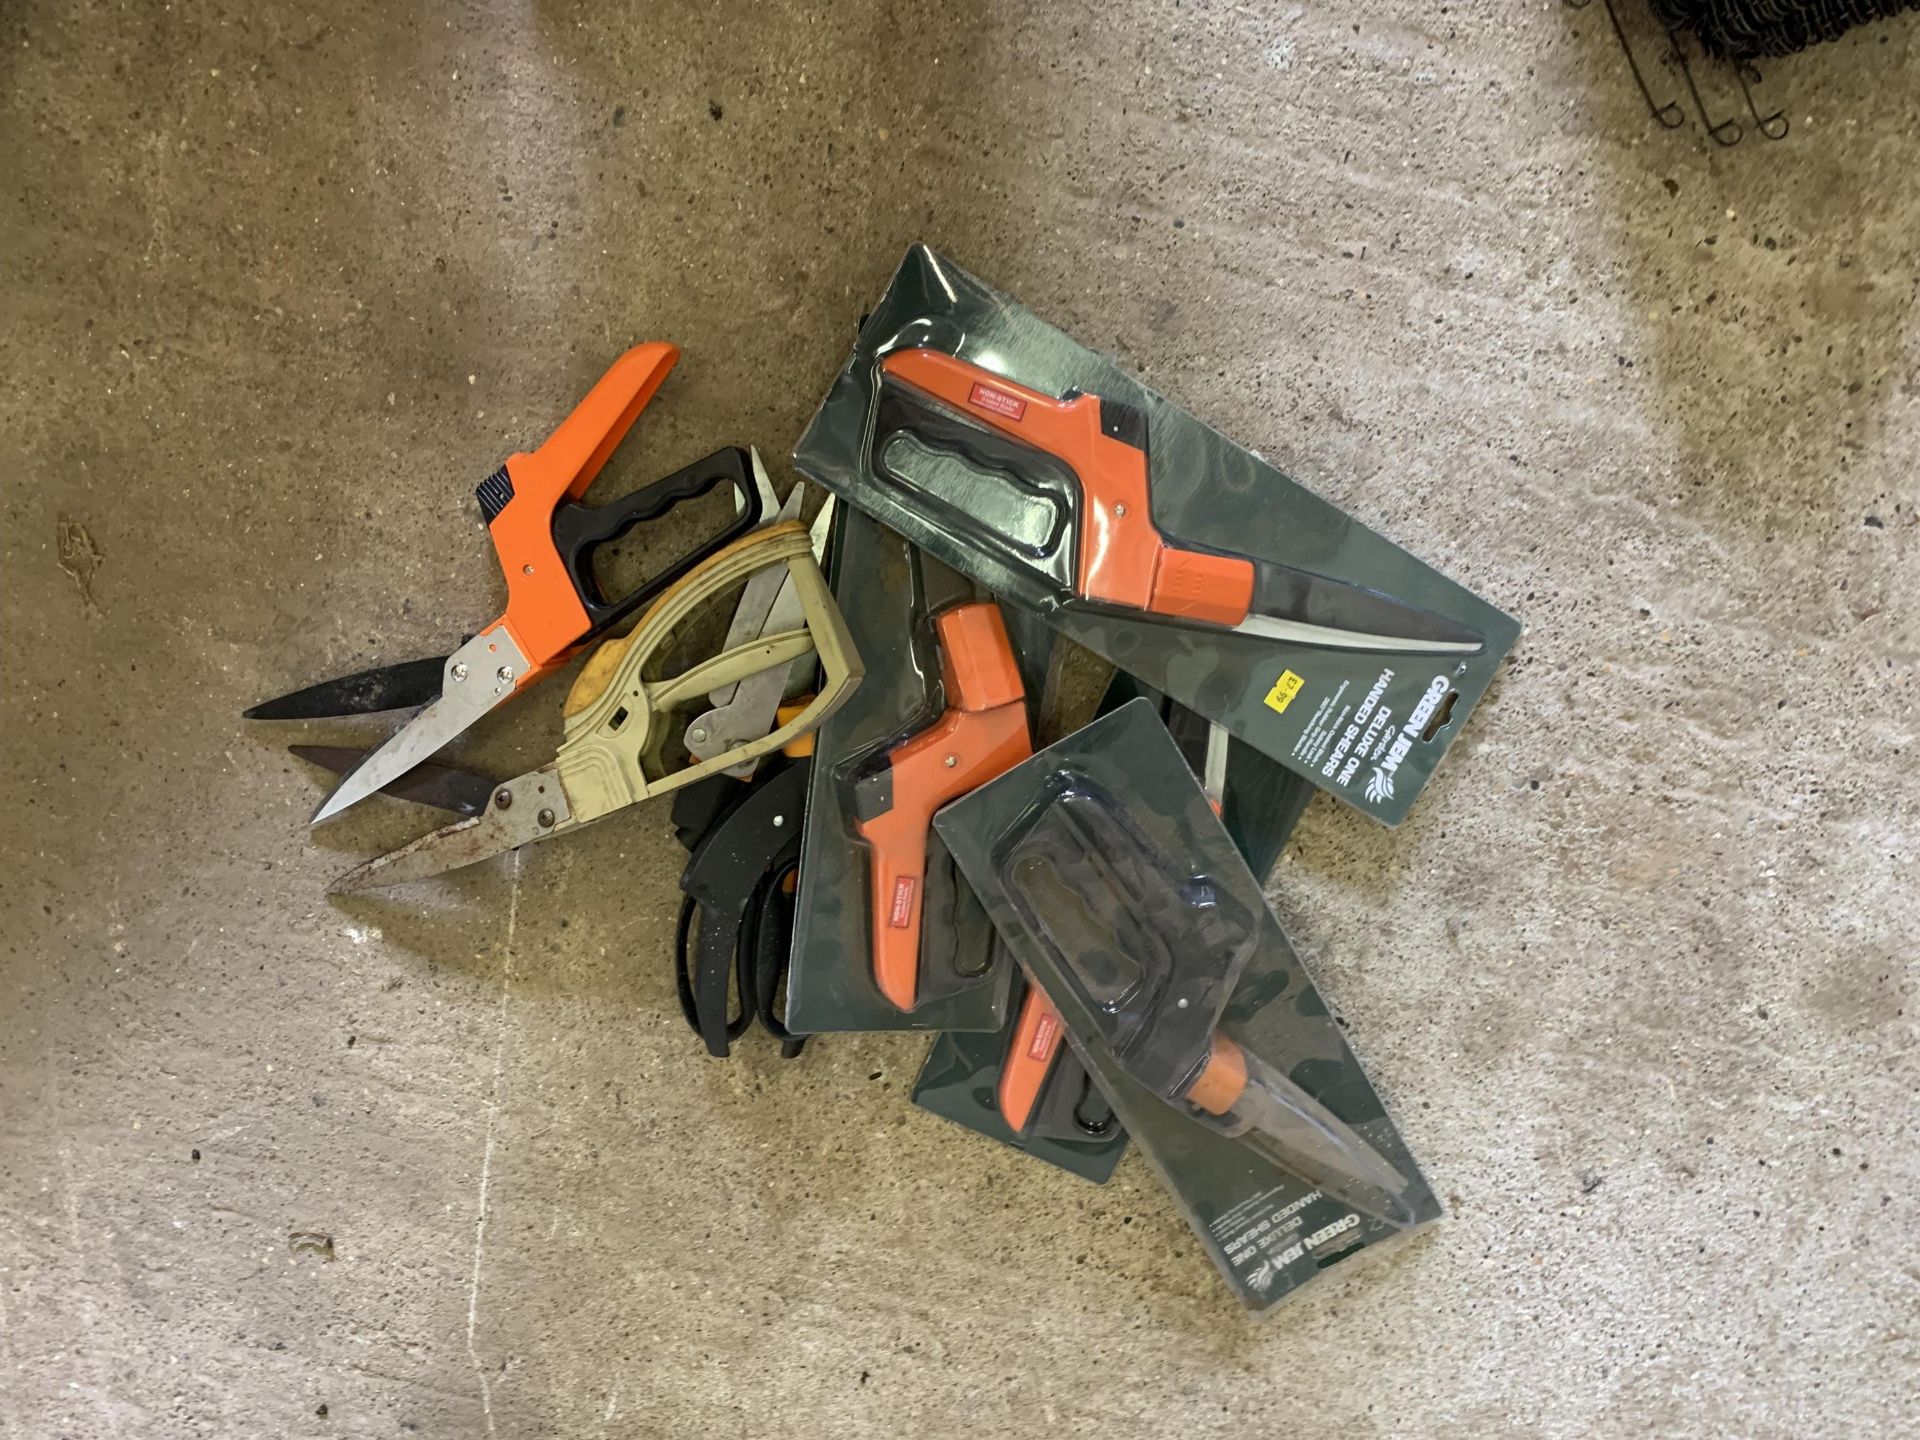 Heap of wing clippers